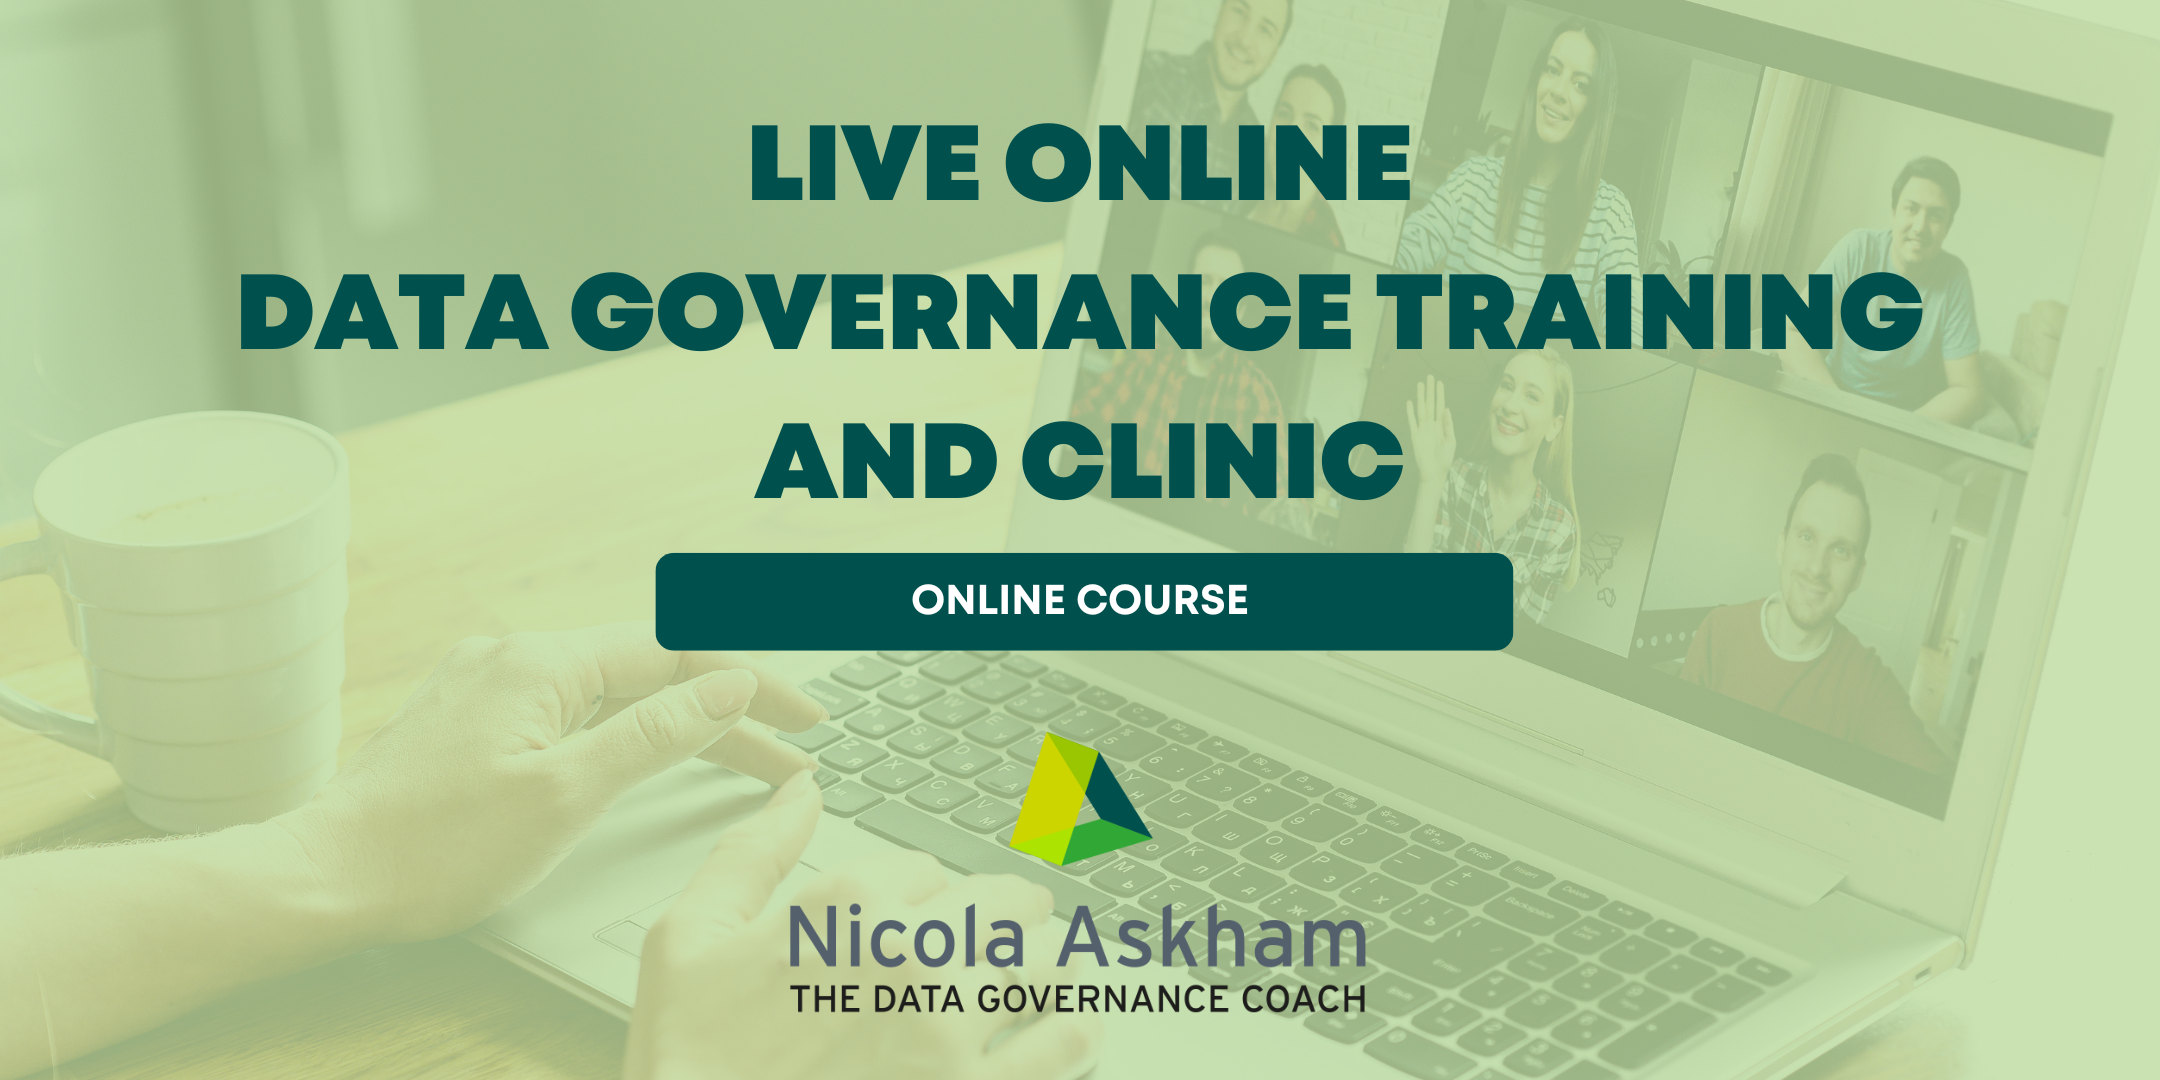 Live Online Data Governance Training and Clinic